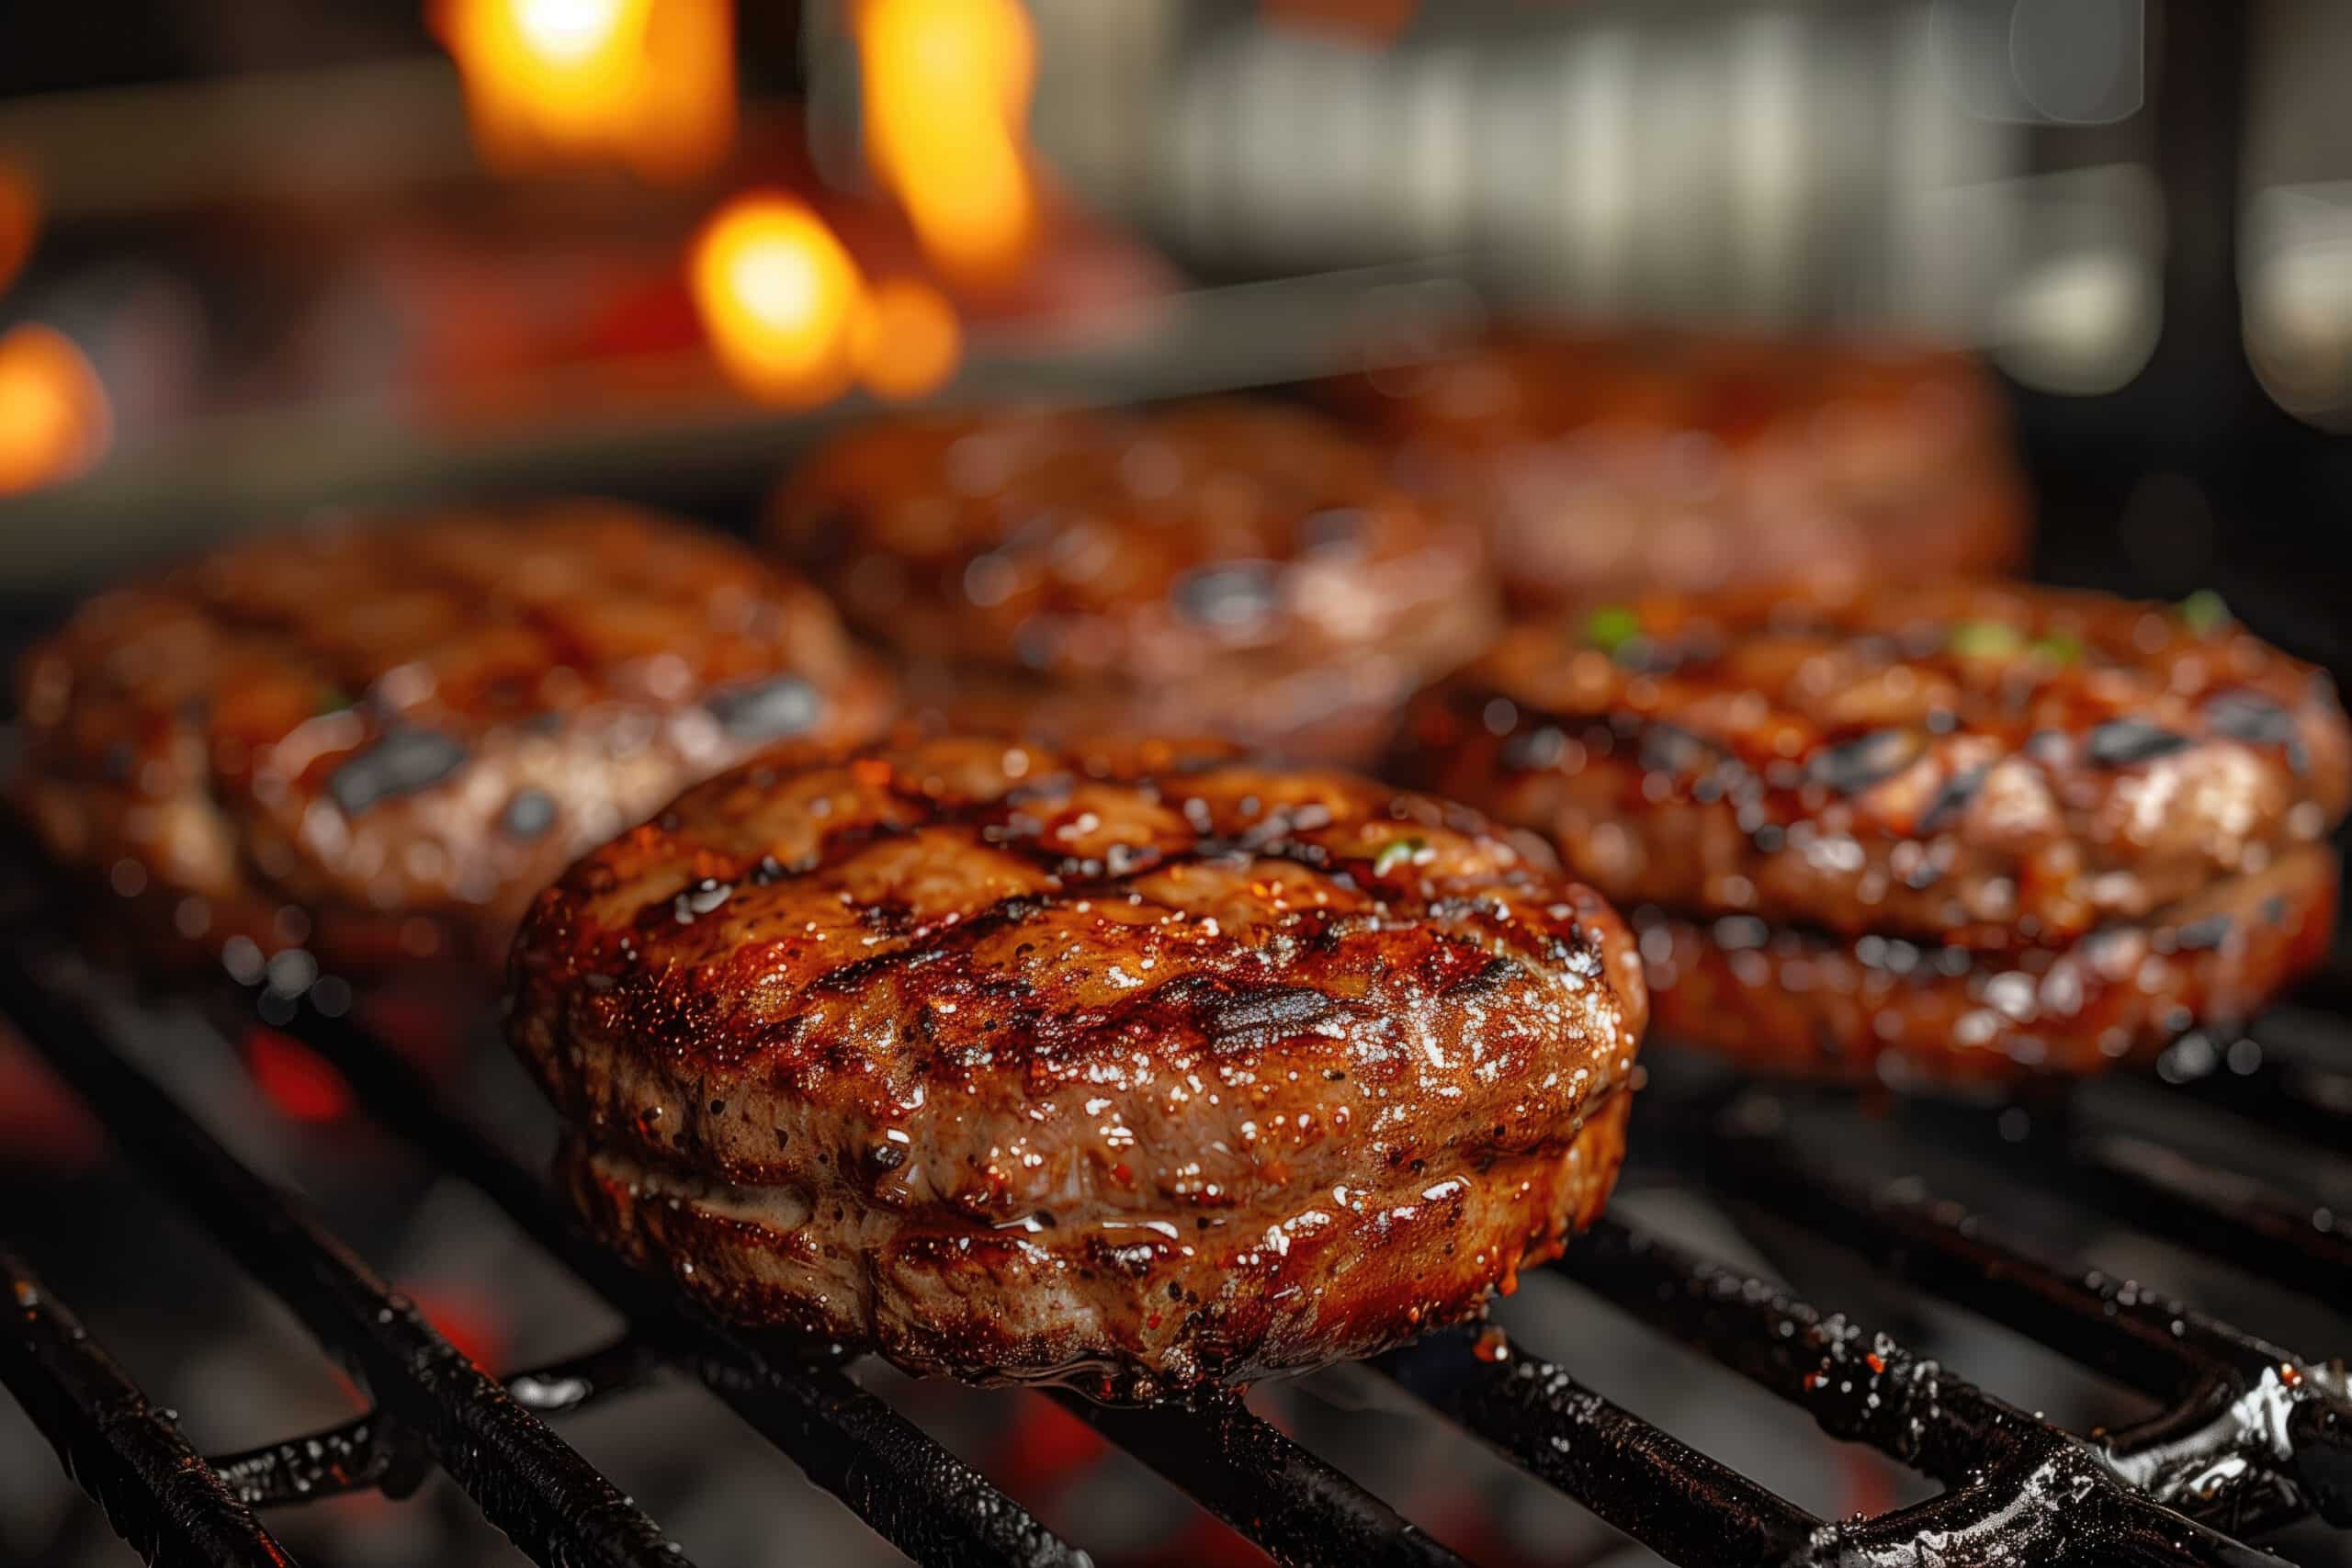 www.appr.com : How Long To Grill Burgers On Gas Grill?